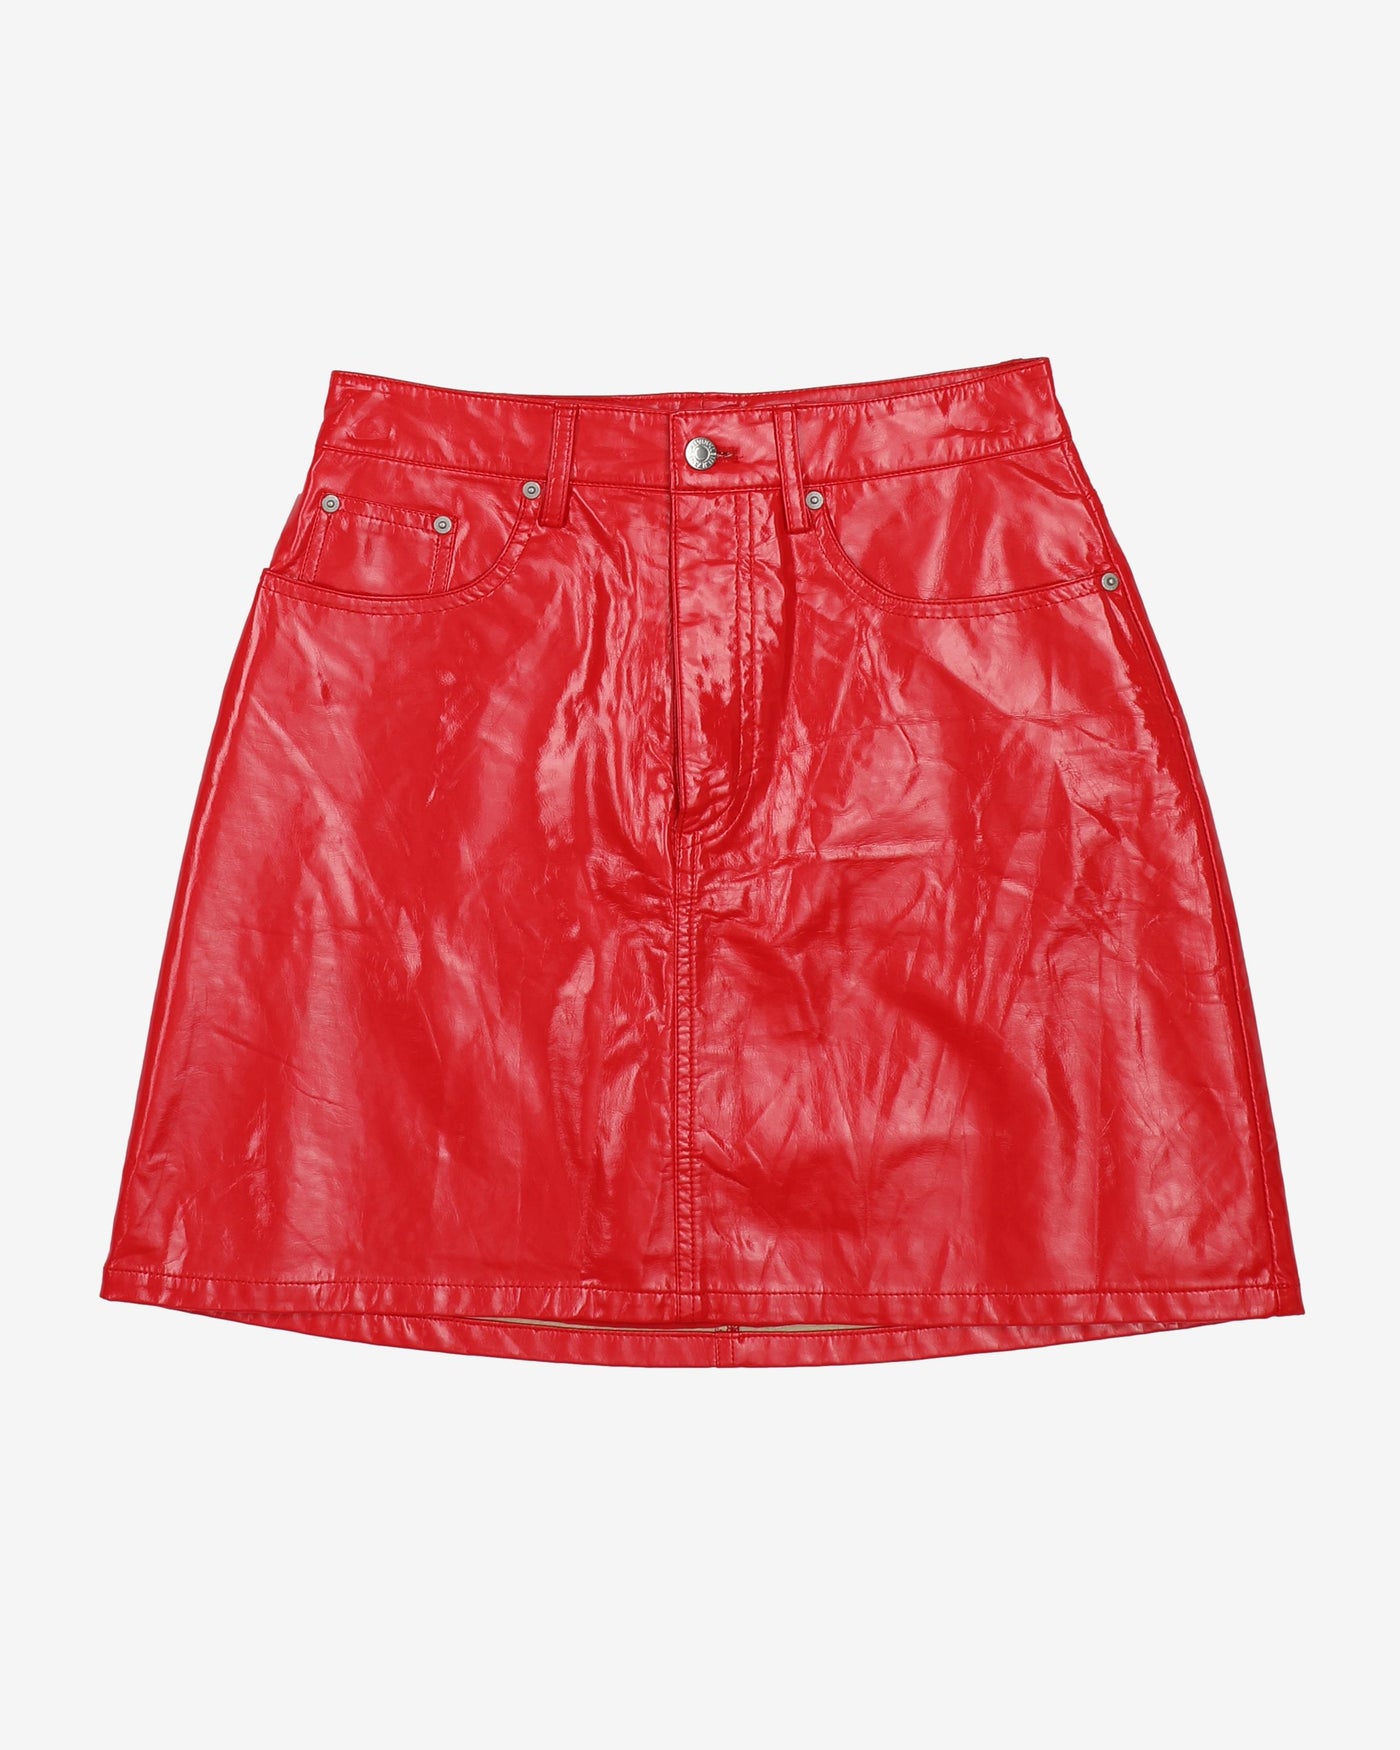 Calvin Klein Jeans Red Faux Leather Mini Skirt - S